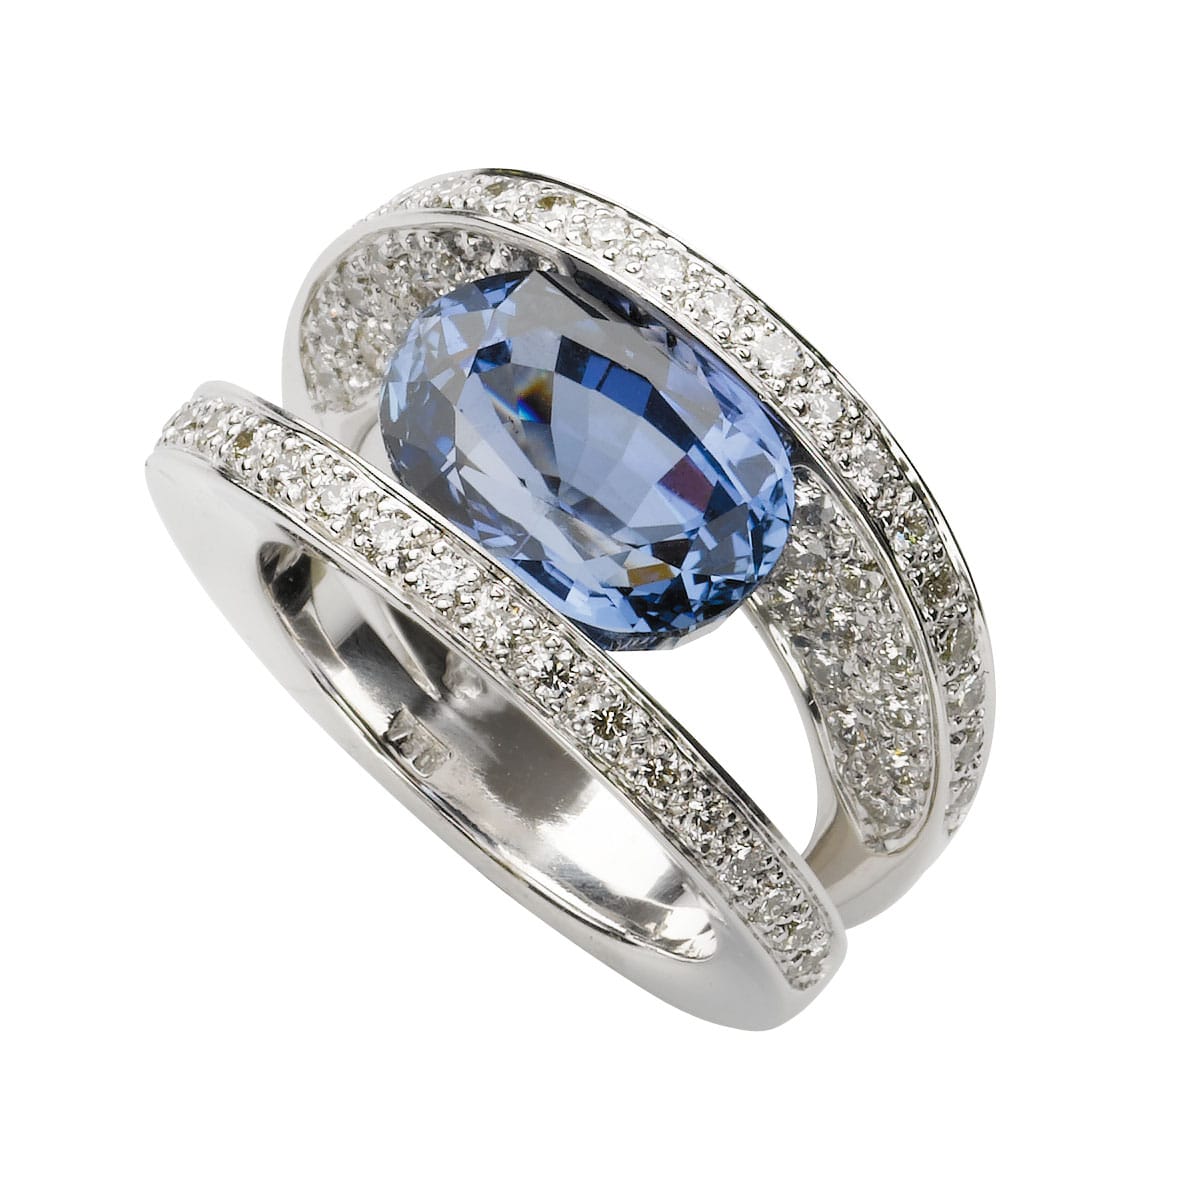 Lionel Meylan Créations - Ring with blue sapphire